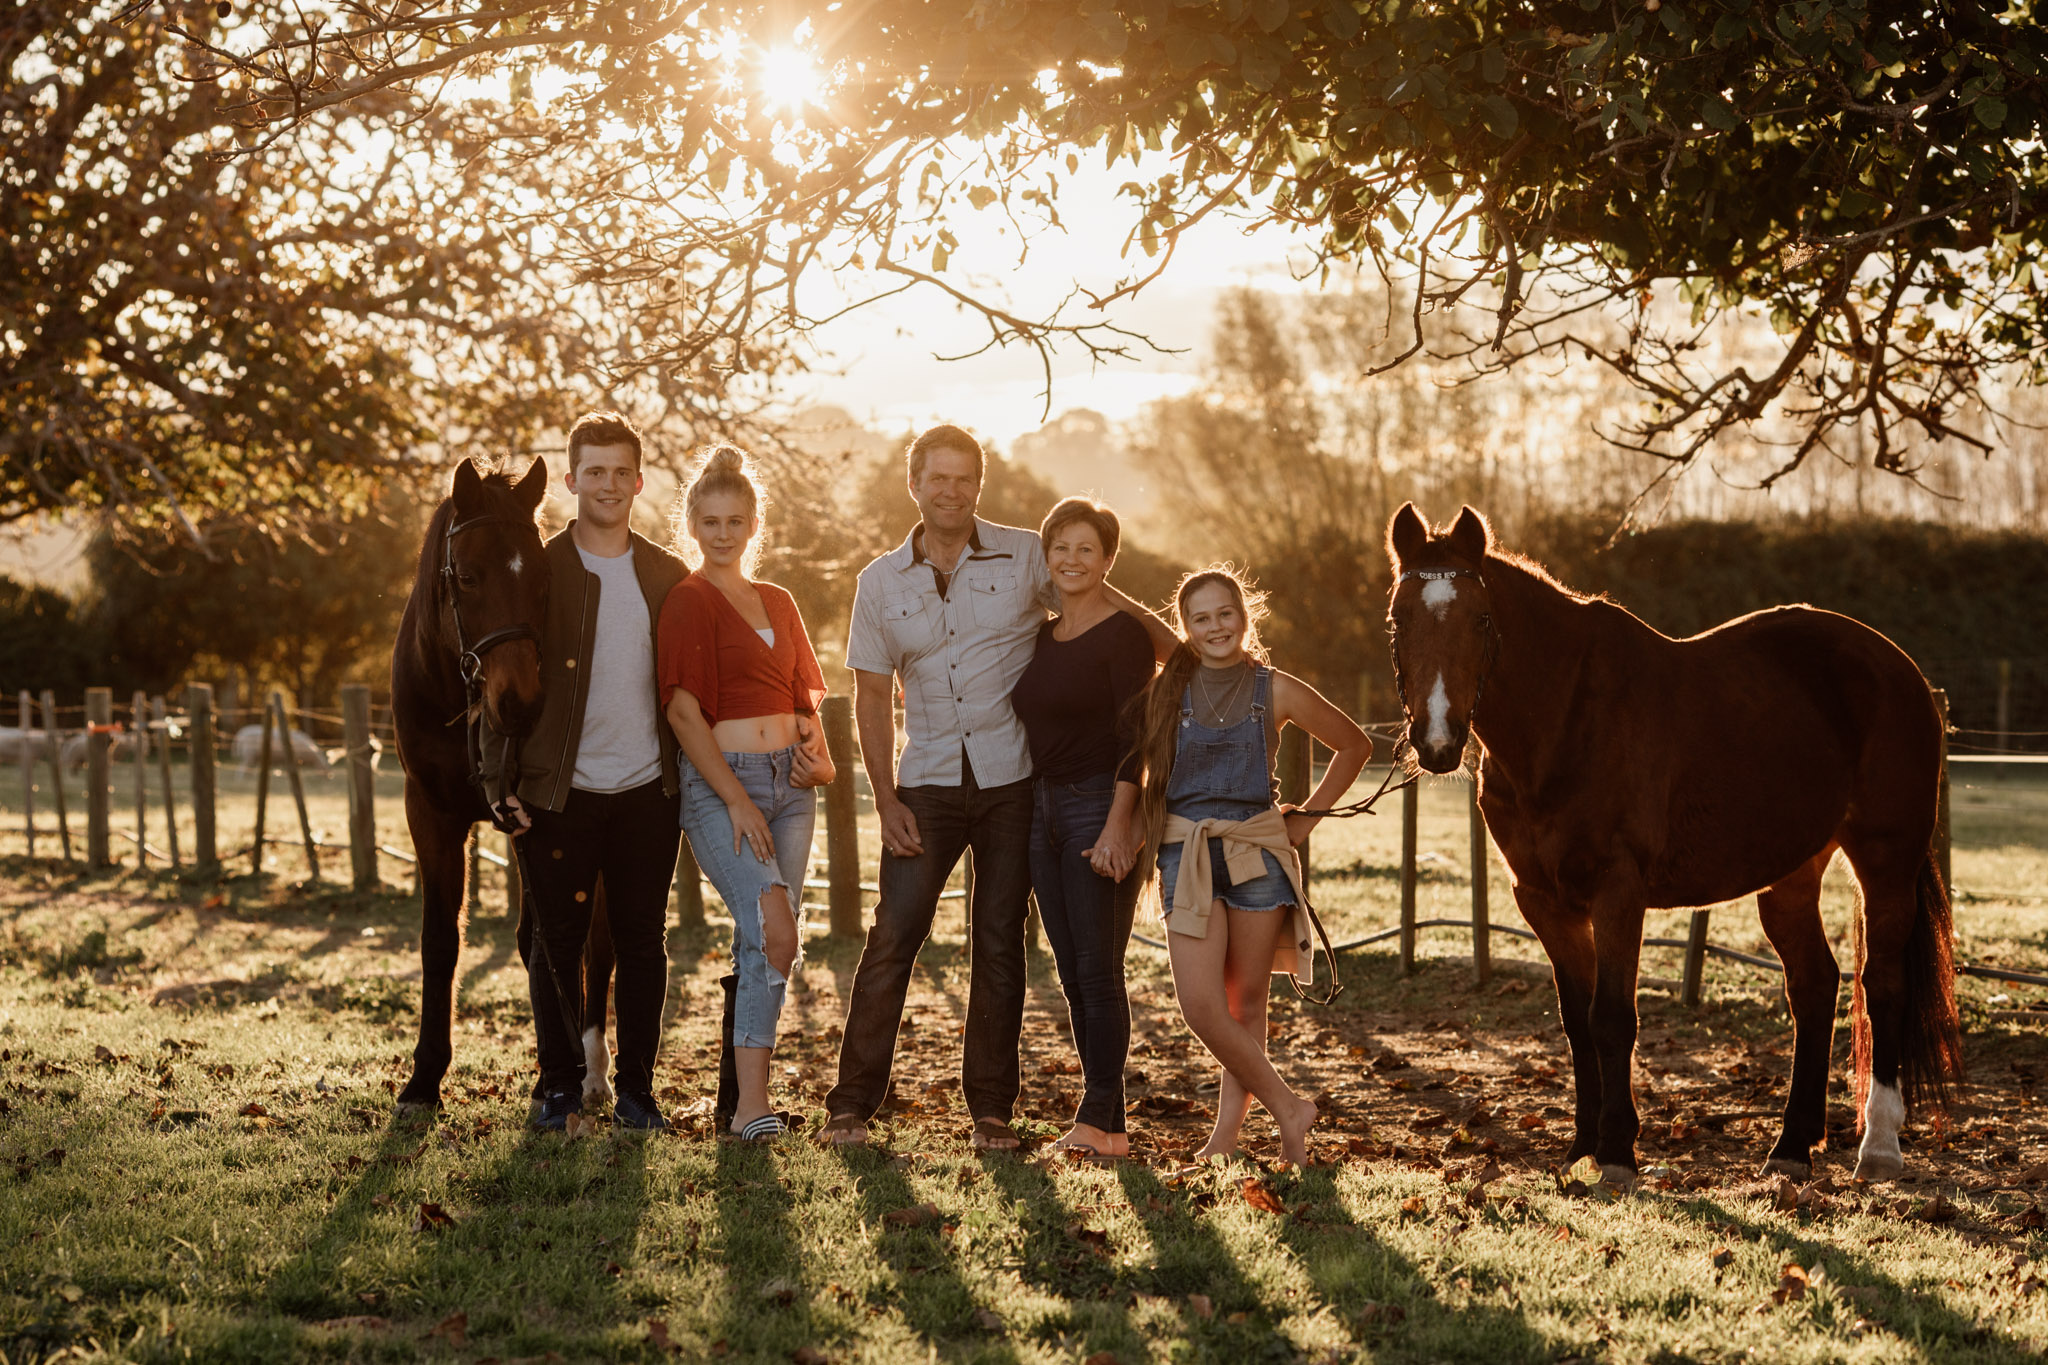 Napier family photo with horses at sunset